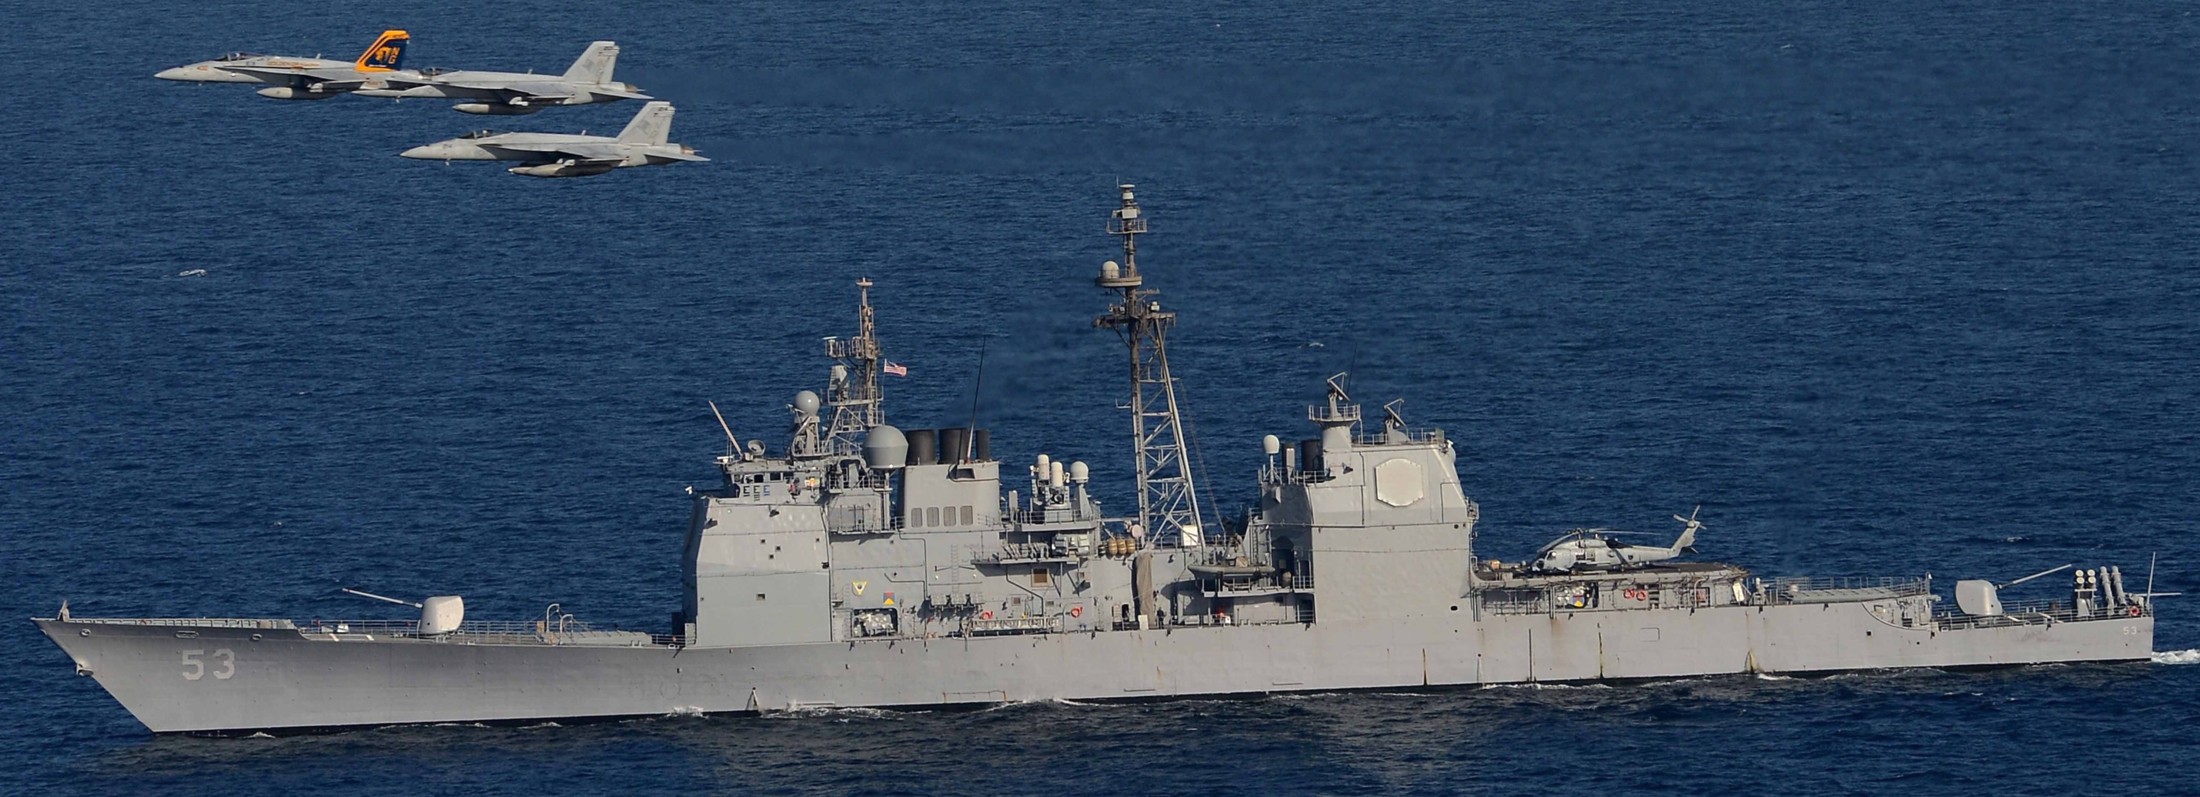 cg-53 uss mobile bay ticonderoga class guided missile cruiser aegis us navy 65